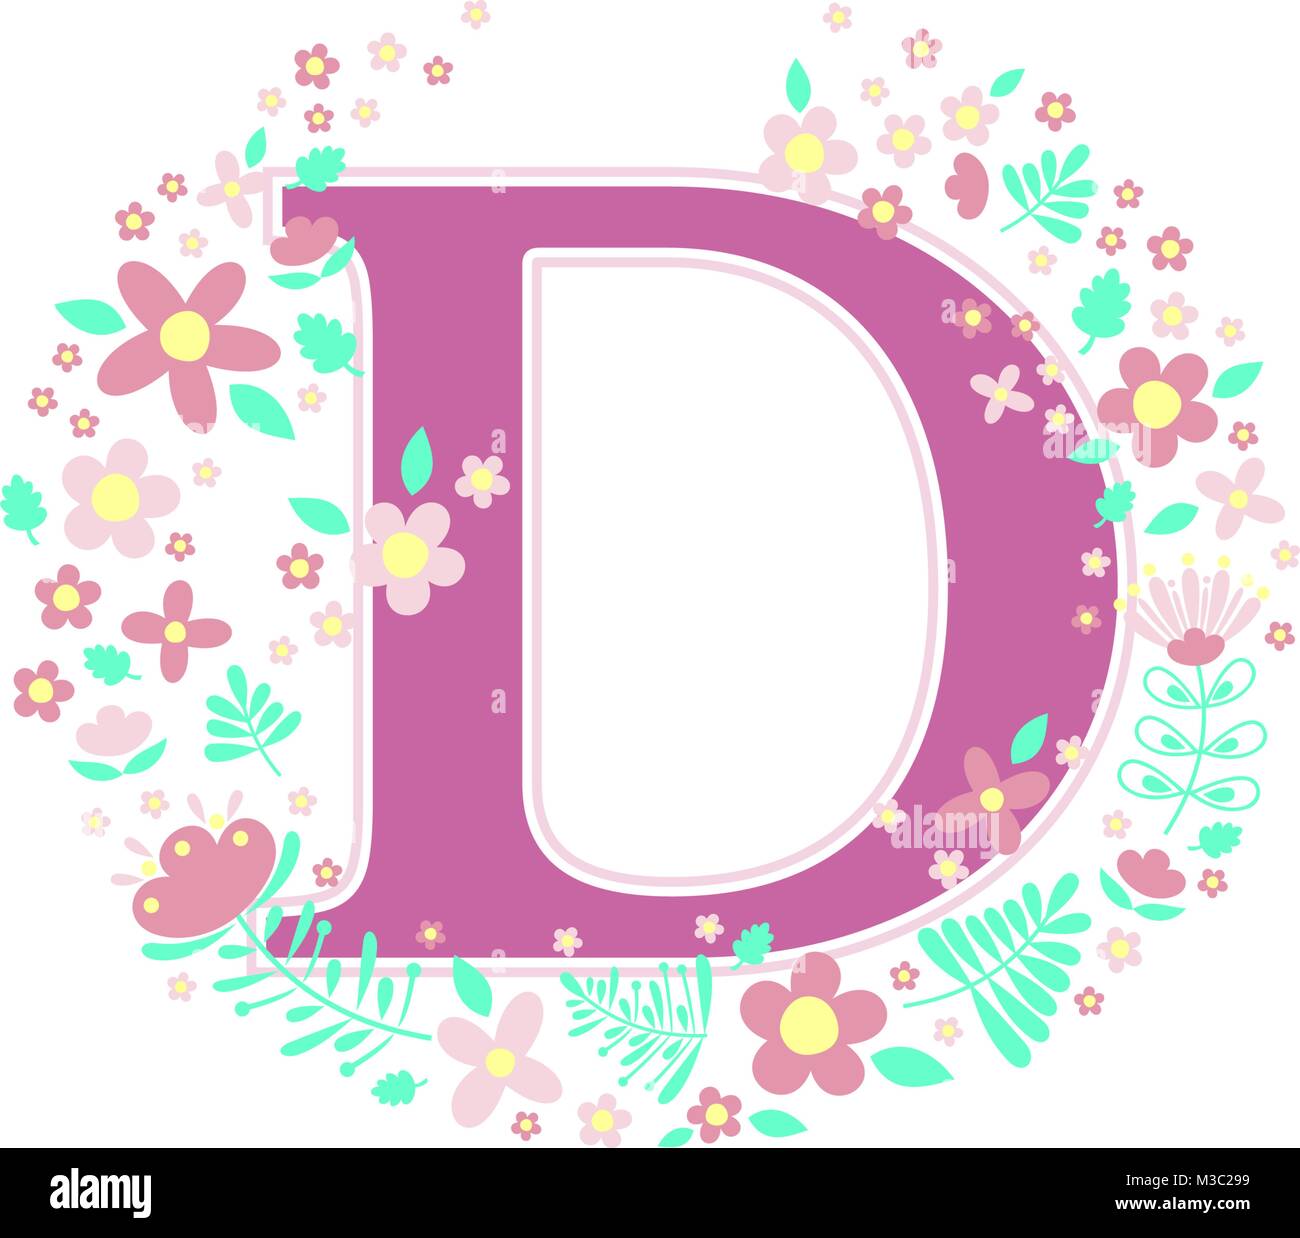 initial letter d with decorative flowers and design elements isolated on white background. can be used for baby name, nursery decoration, spring theme Stock Vector